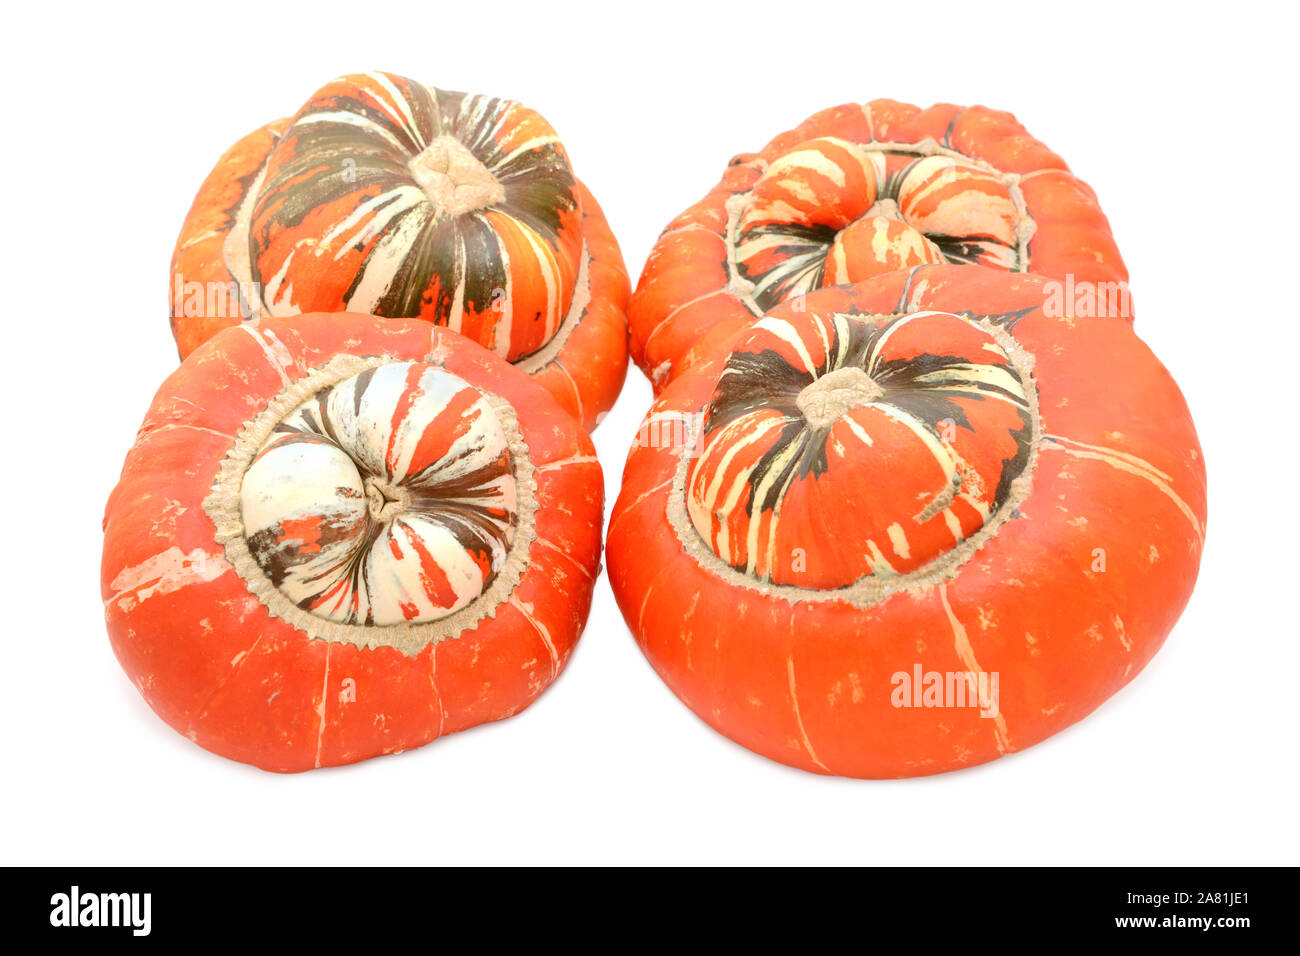 Four large Turks Turban ornamental gourds with orange caps and striped centres, on a white background Stock Photo